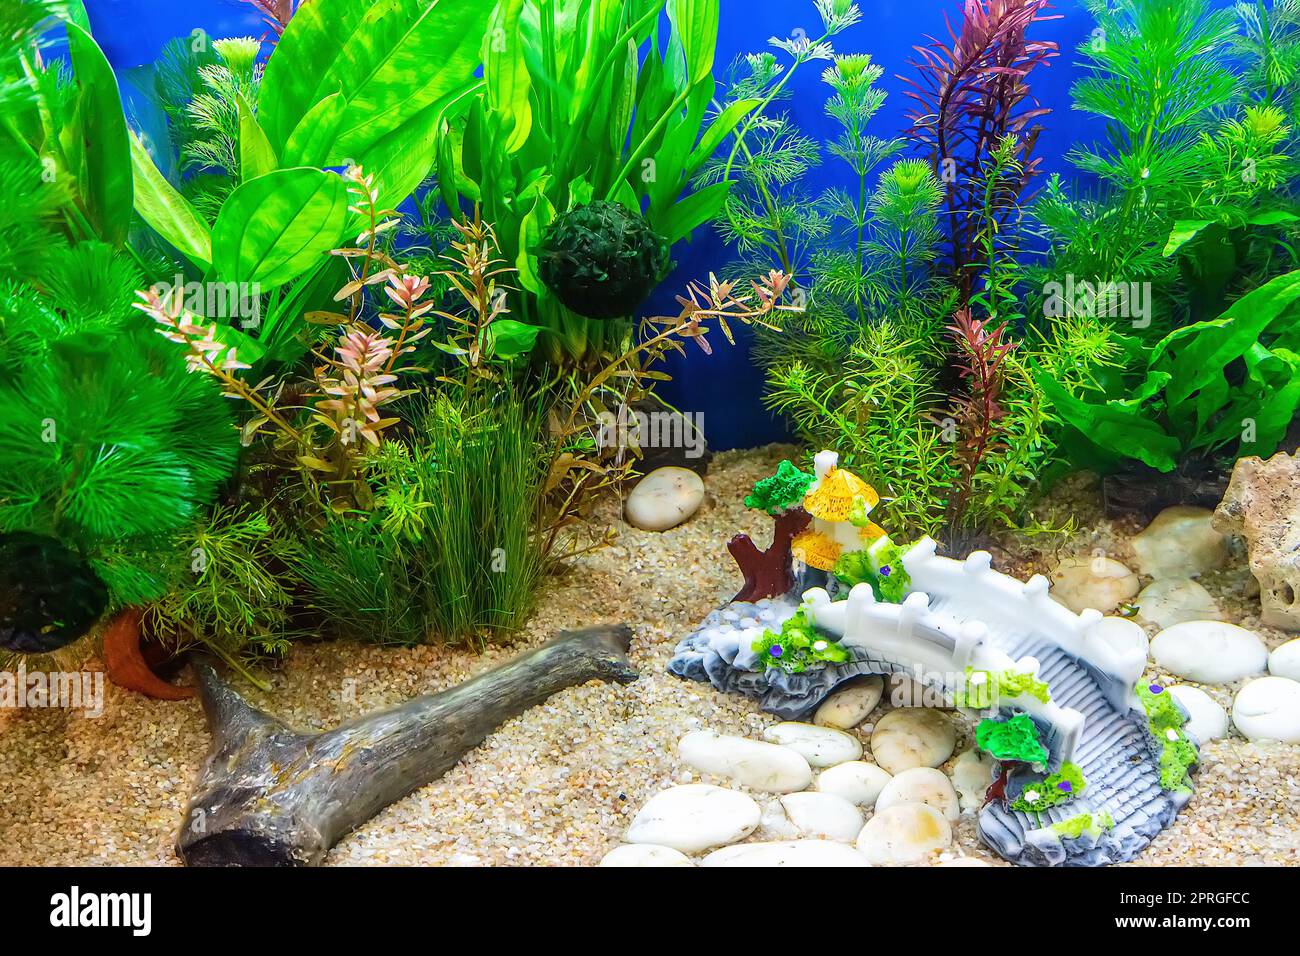 Underwater landscape nature forest style aquarium tank with a